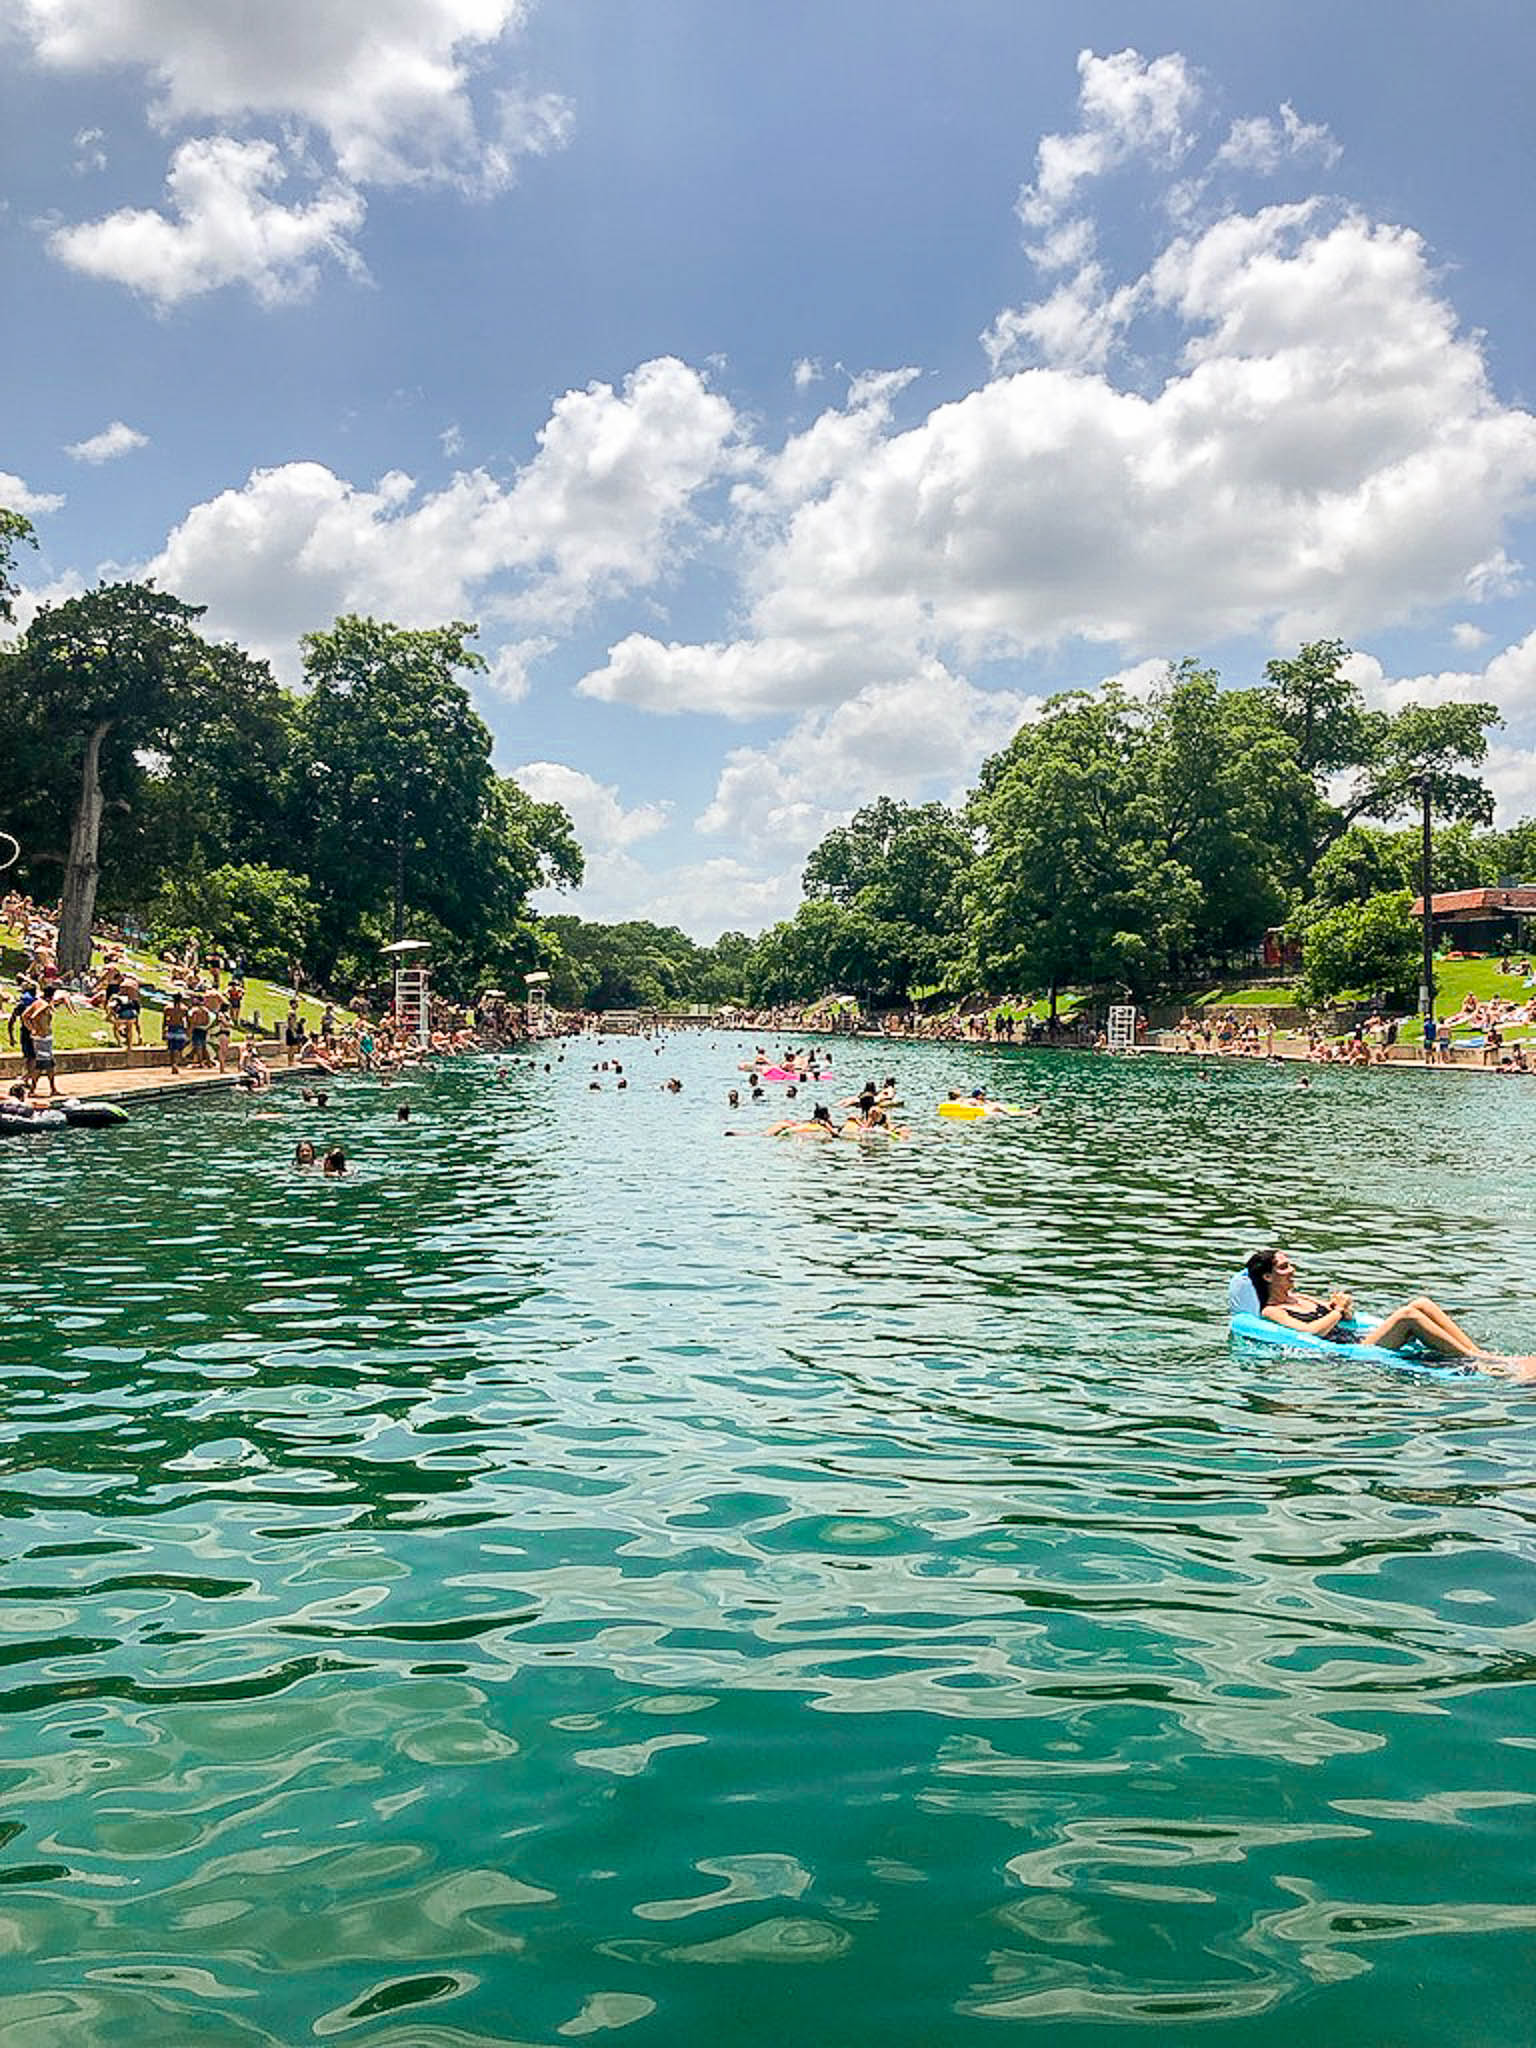 BARTON SPRINGS POOL - 101 free things to do in ATX!